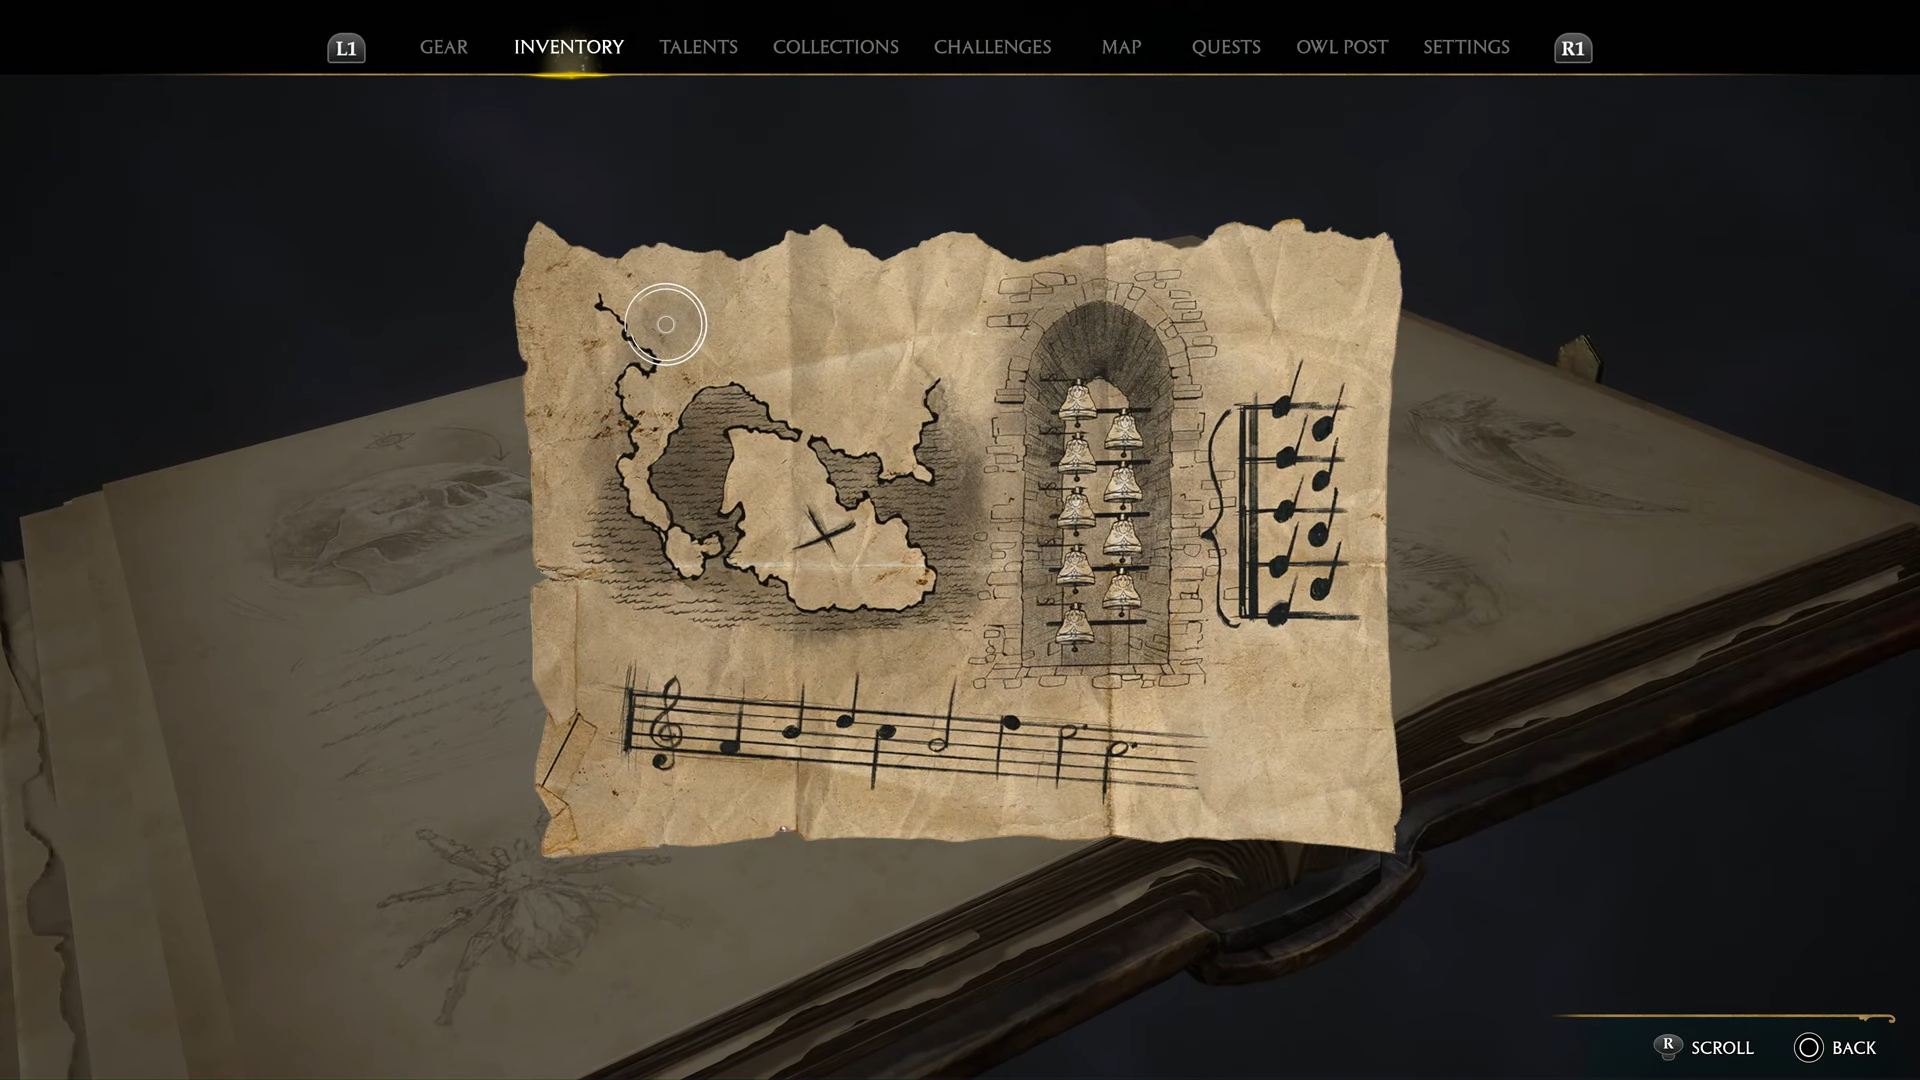 A map with musical notes on the bottom.